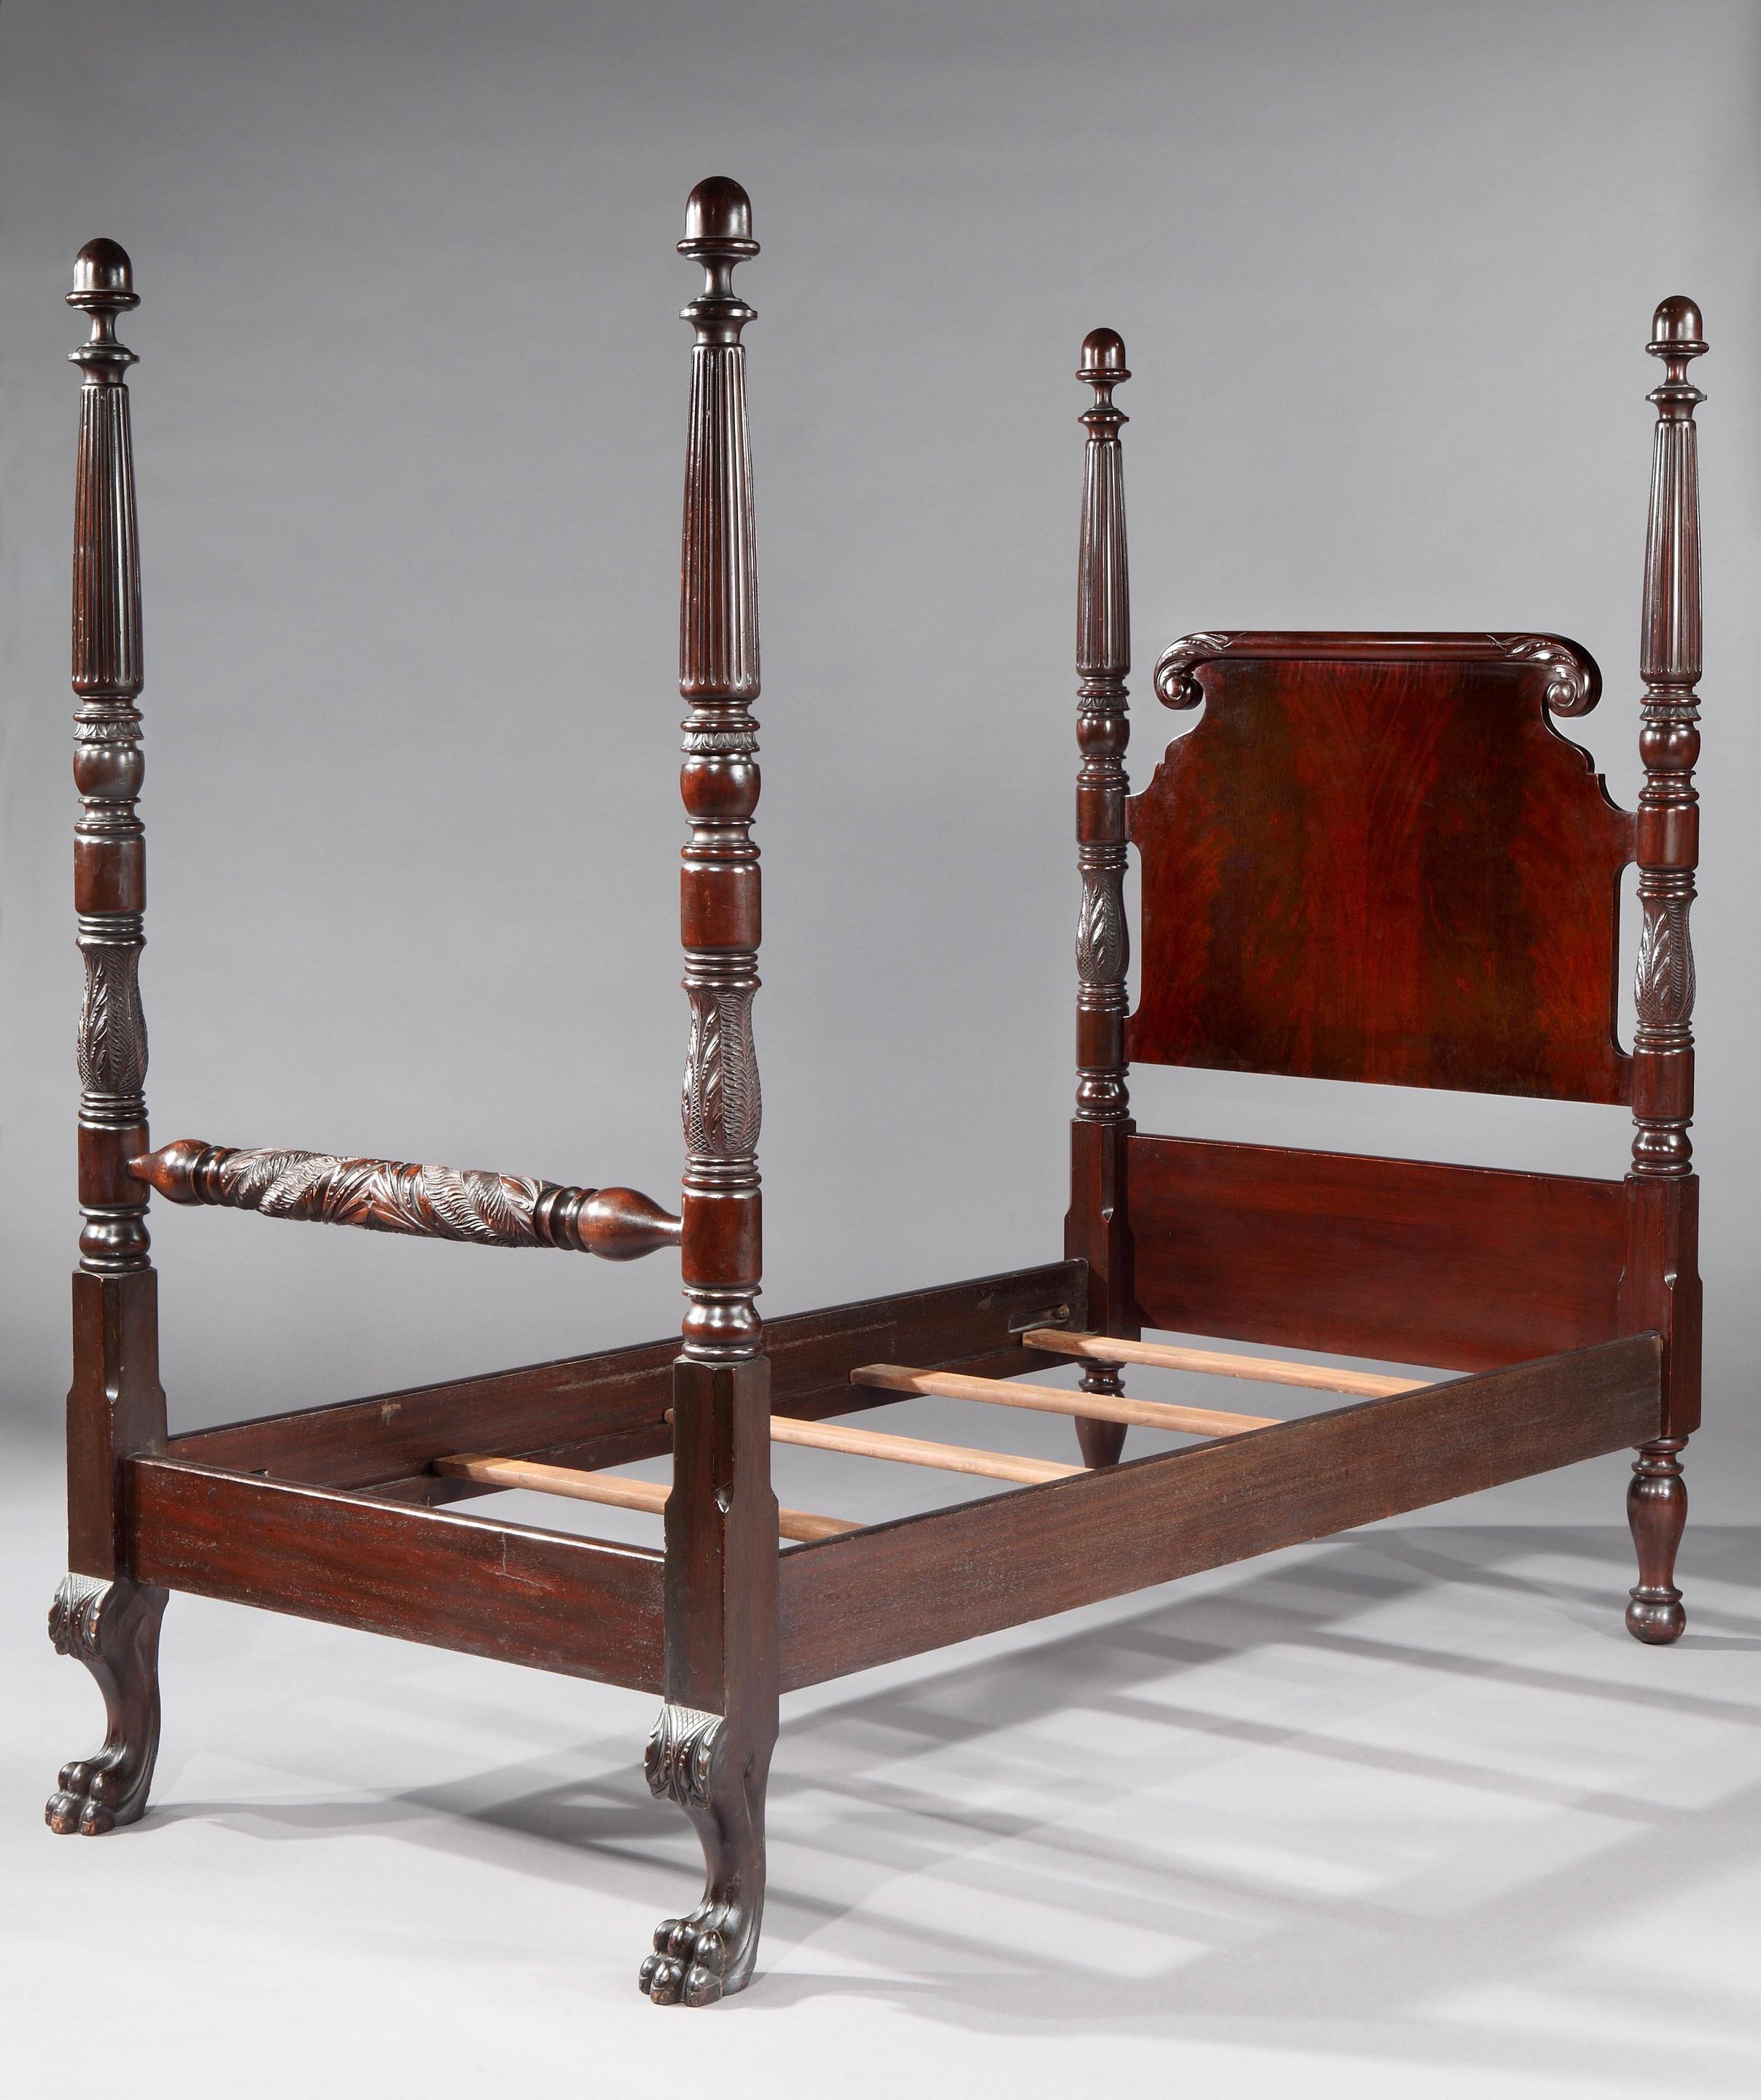 This pair of half-tester beds were acquired for the guest suite at Douglas Fairbanks Sr and Mary Pickford’s Beverly Hills estate, Pickfair, which housed a collection of early 18th century English and French period furniture, in the 1920s. Life